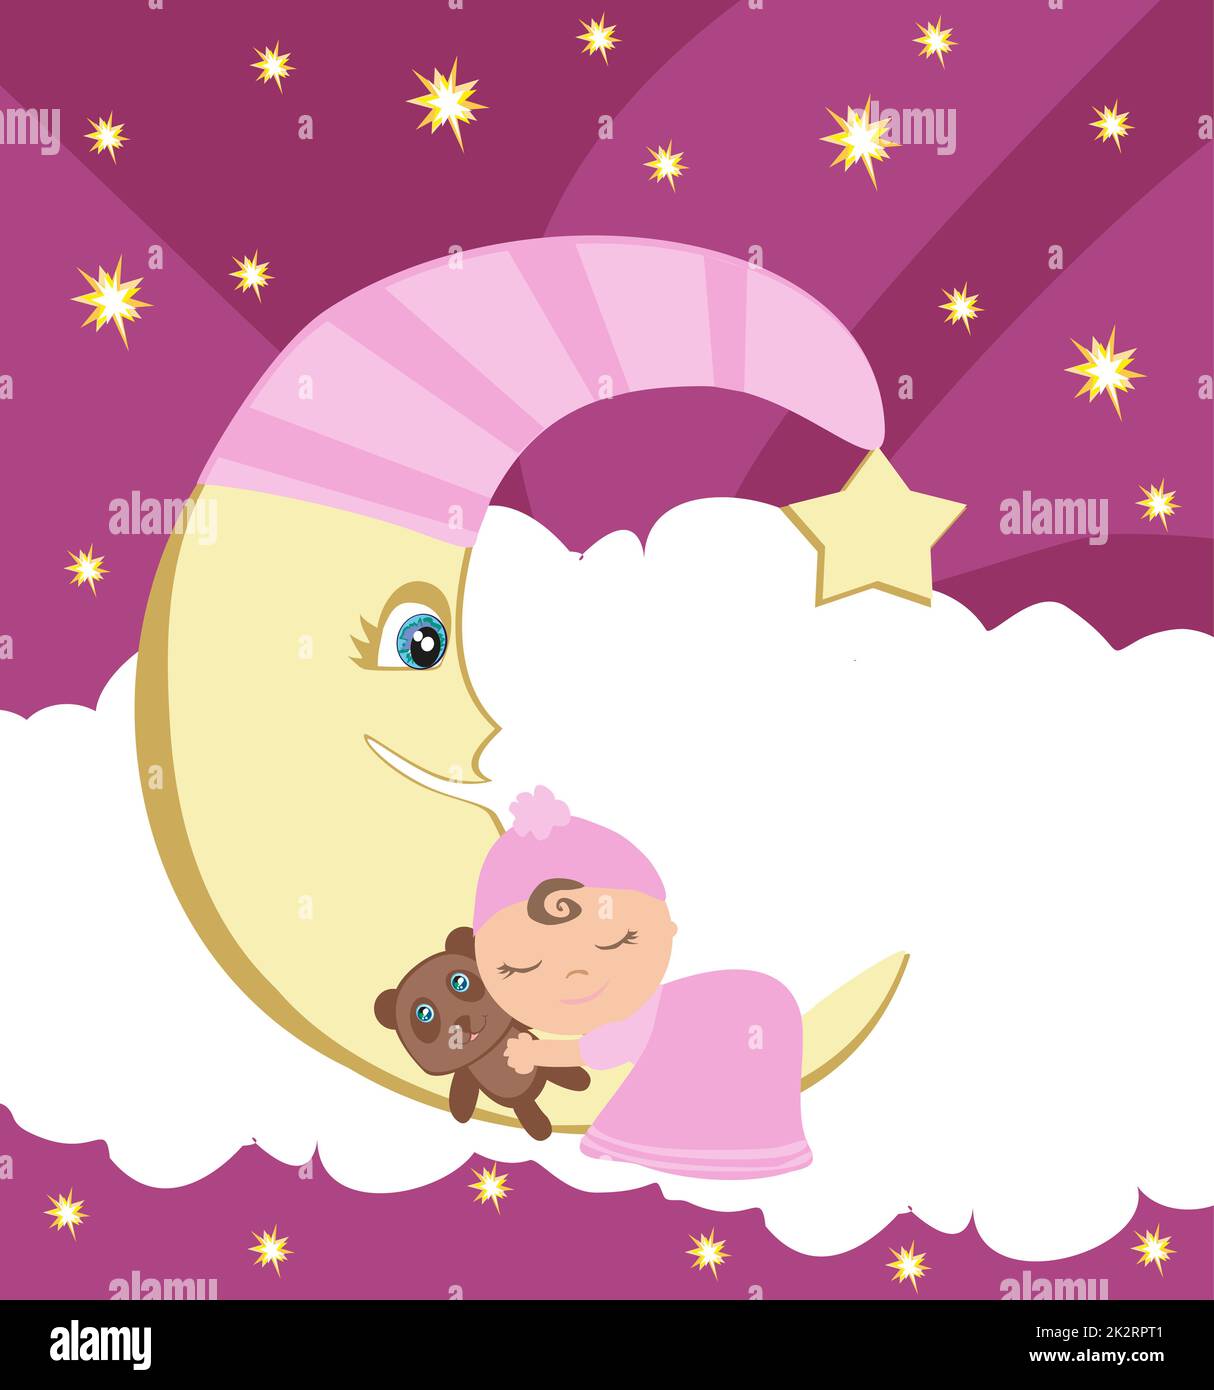 Cute little girl sleeping on moon Banque D'Images